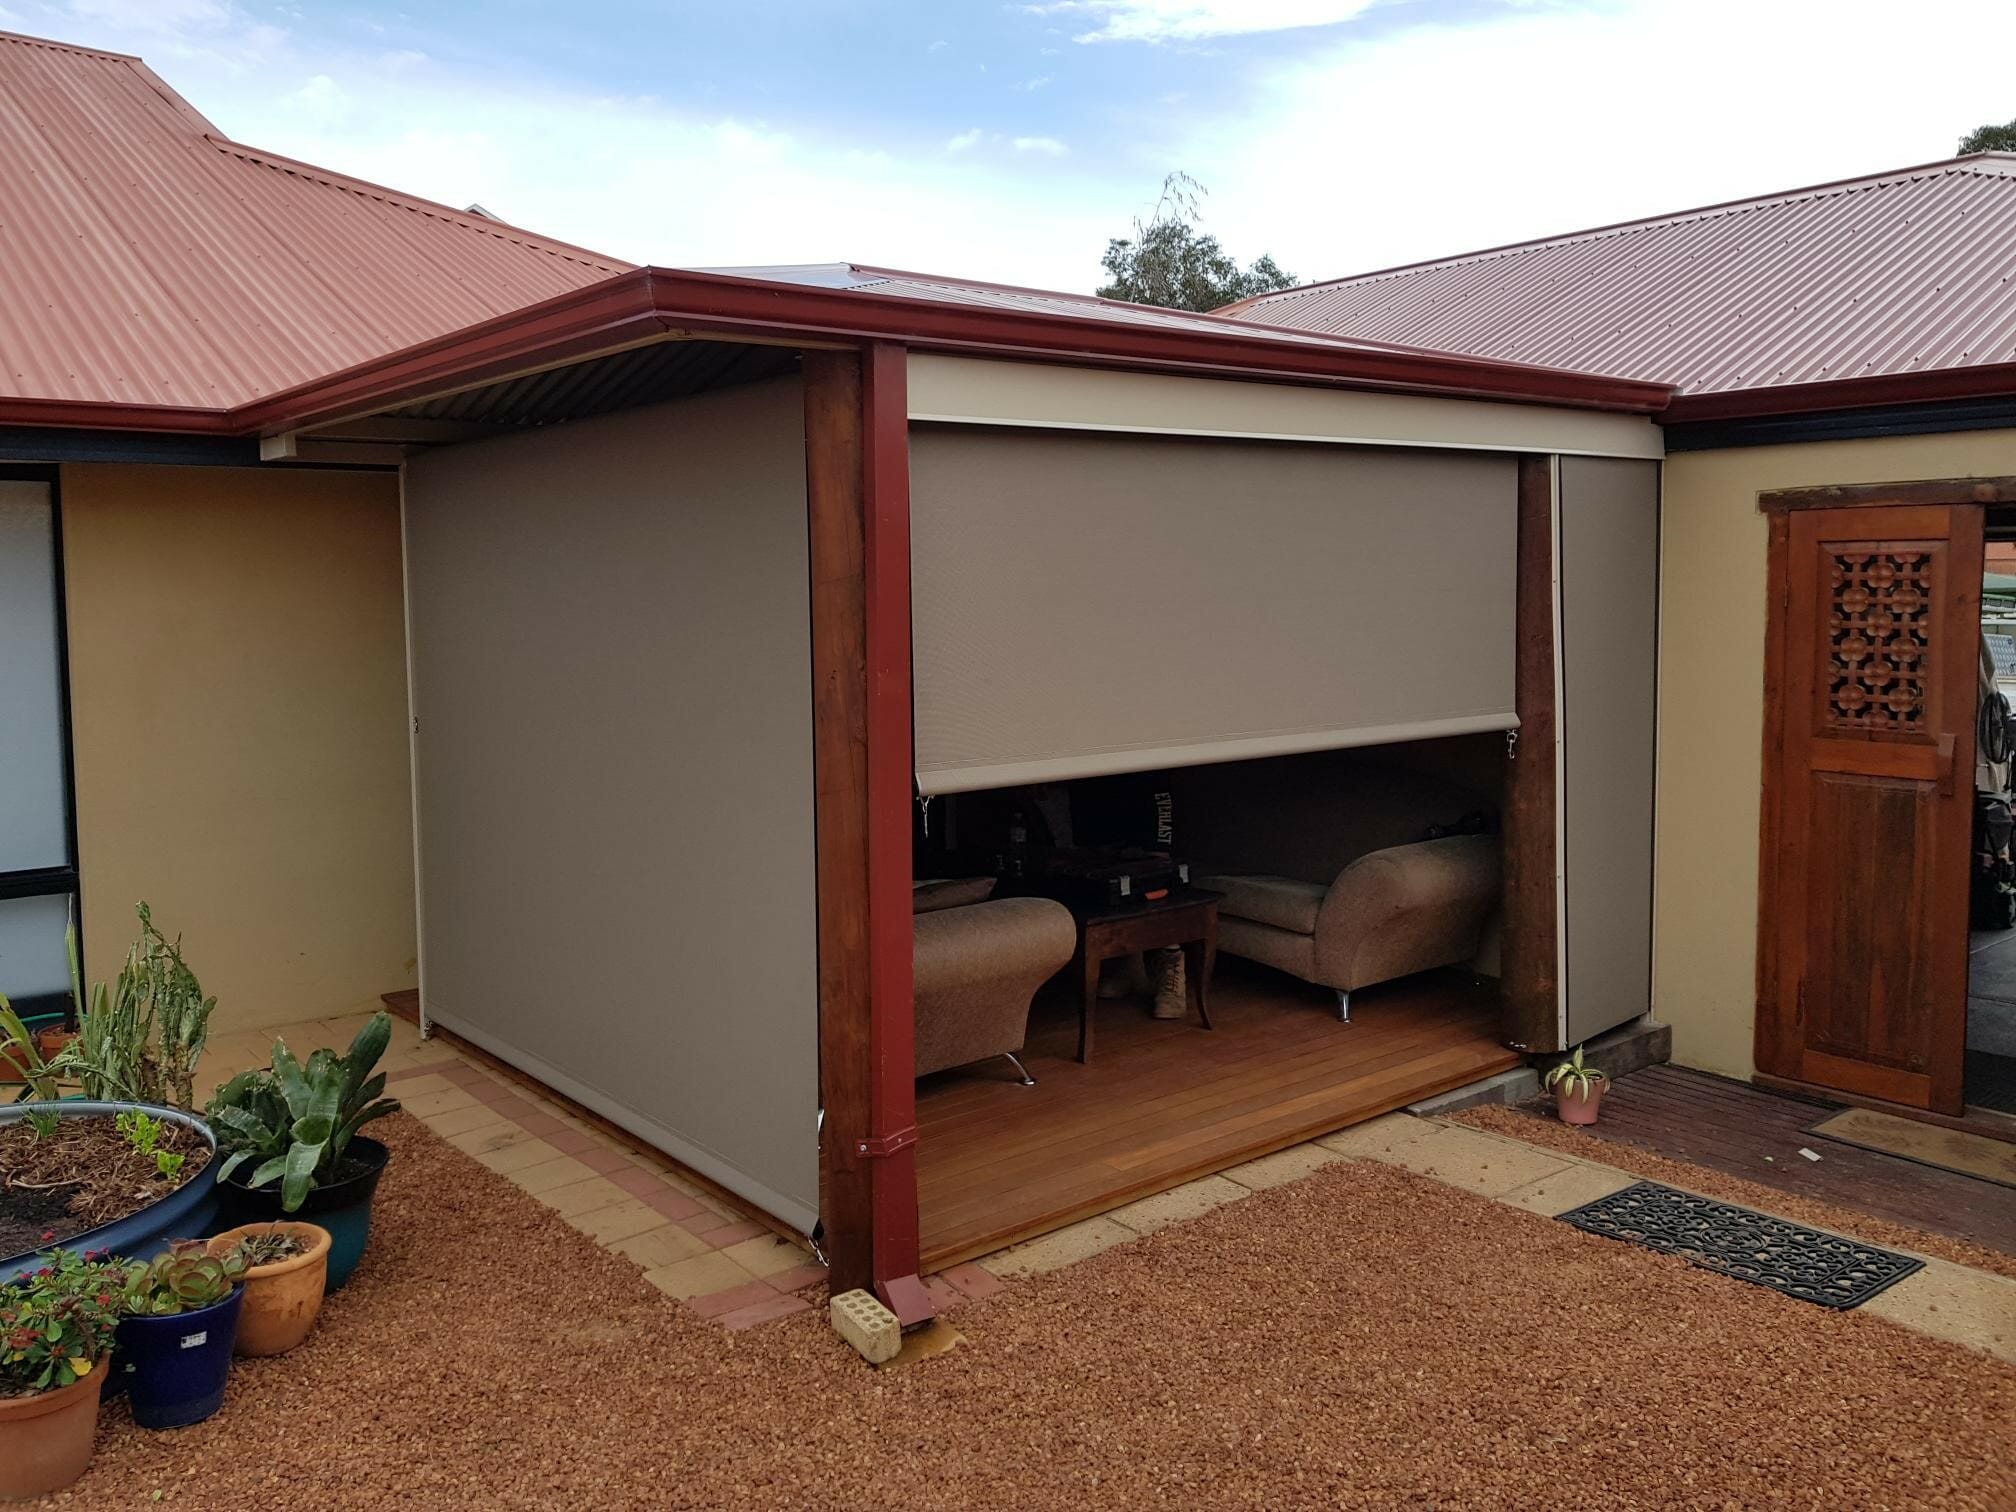 02 All About Shade - Crank & Clip Blinds Perth -Straight Drop Awnings